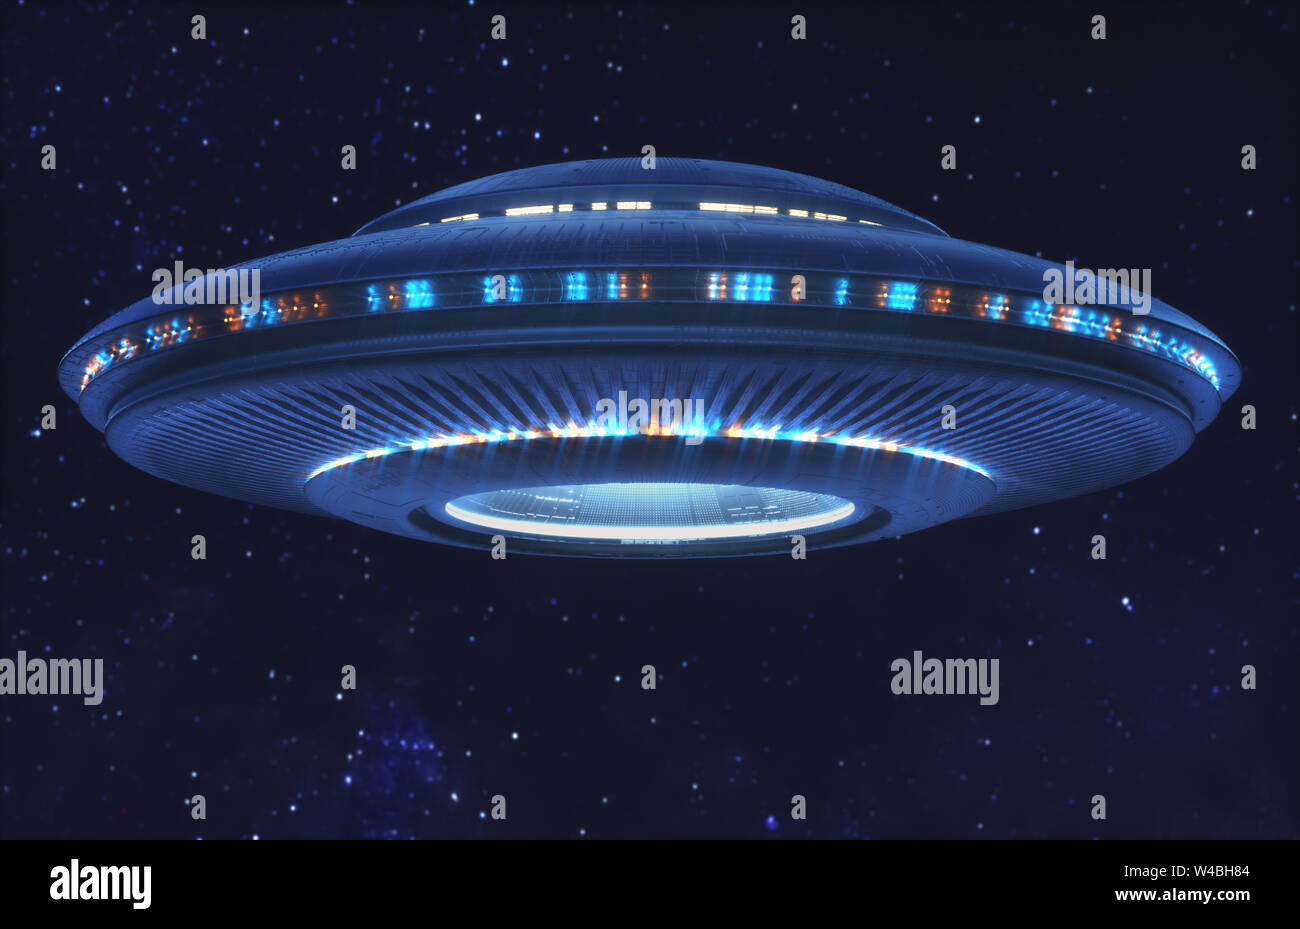 Unidentified flying object UFO with clipping path included. 3D illustration. Stock Photo